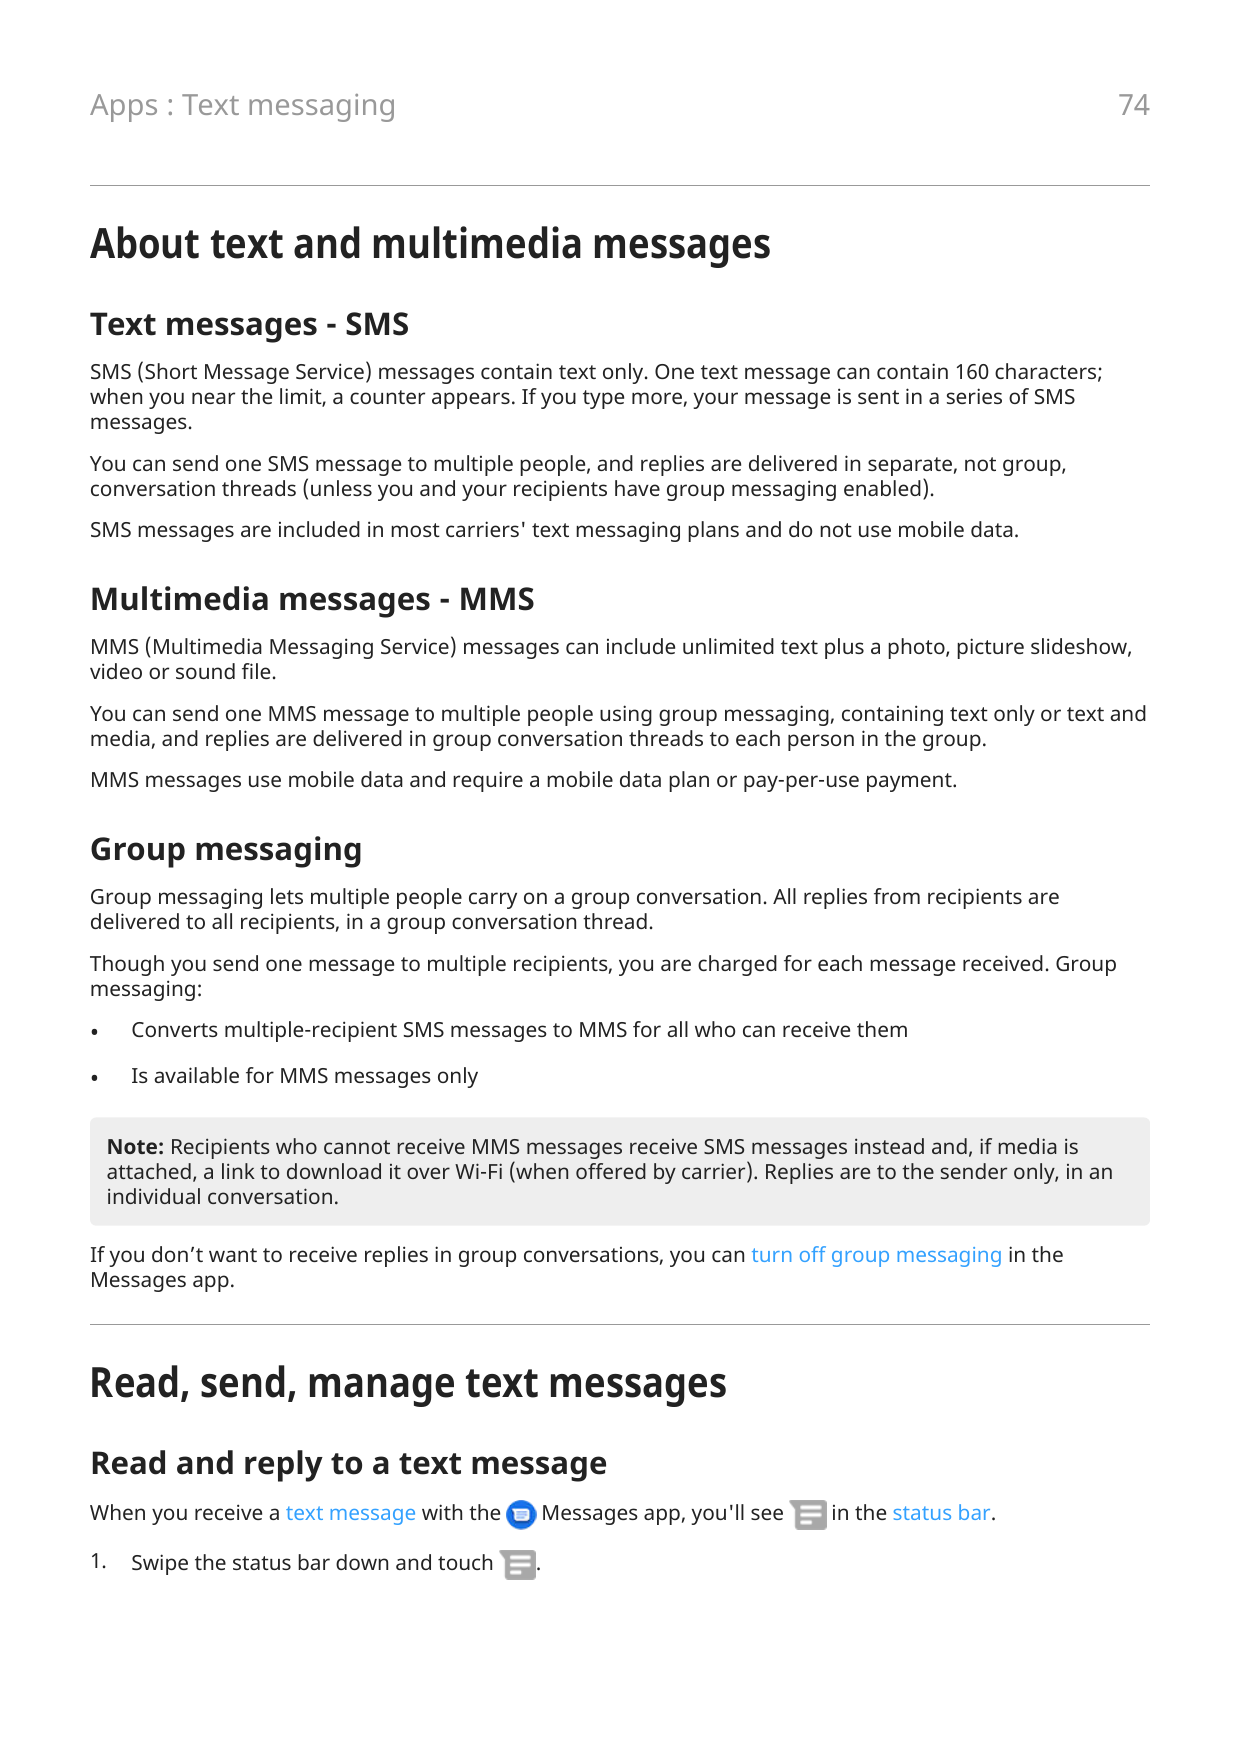 74Apps : Text messagingAbout text and multimedia messagesText messages - SMSSMS (Short Message Service) messages contain text on